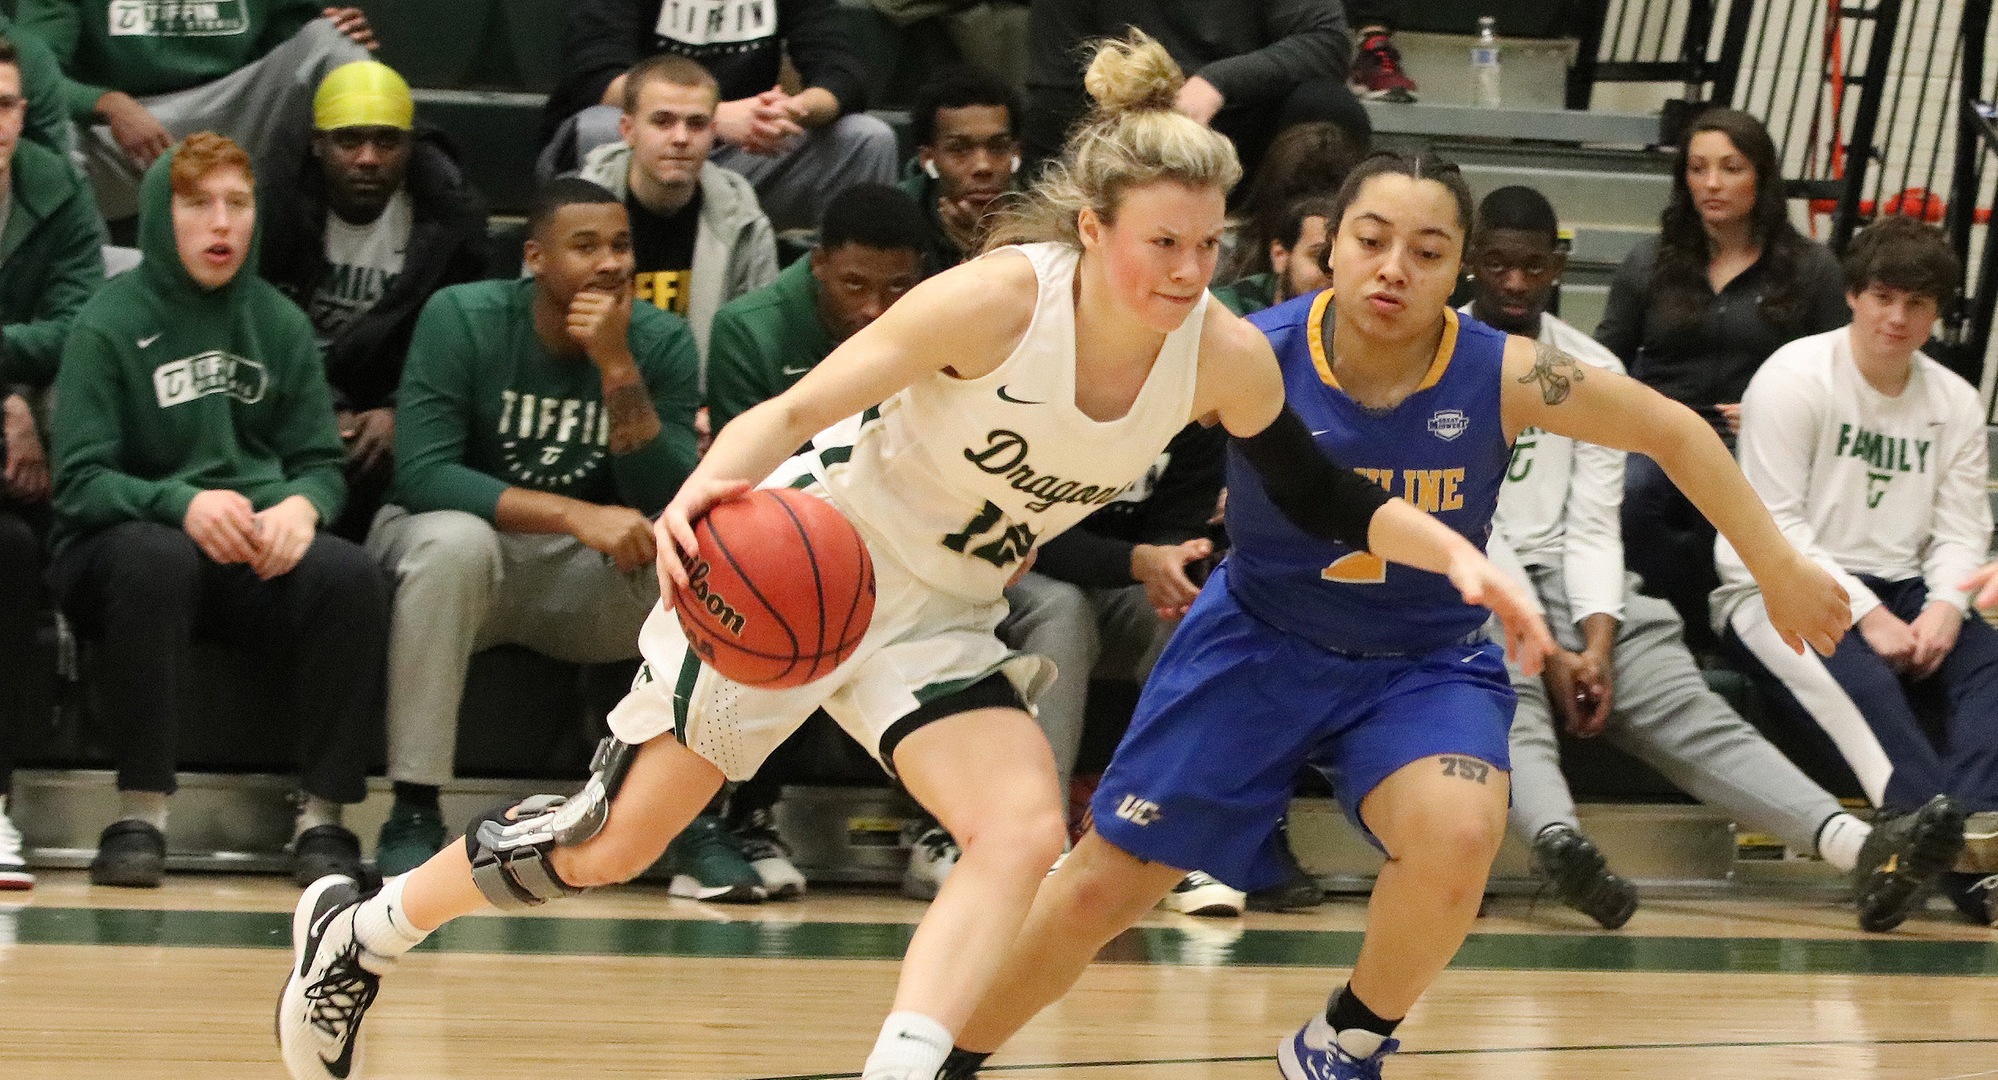 Fourth Quarter Run Leads Tiffin to Victory